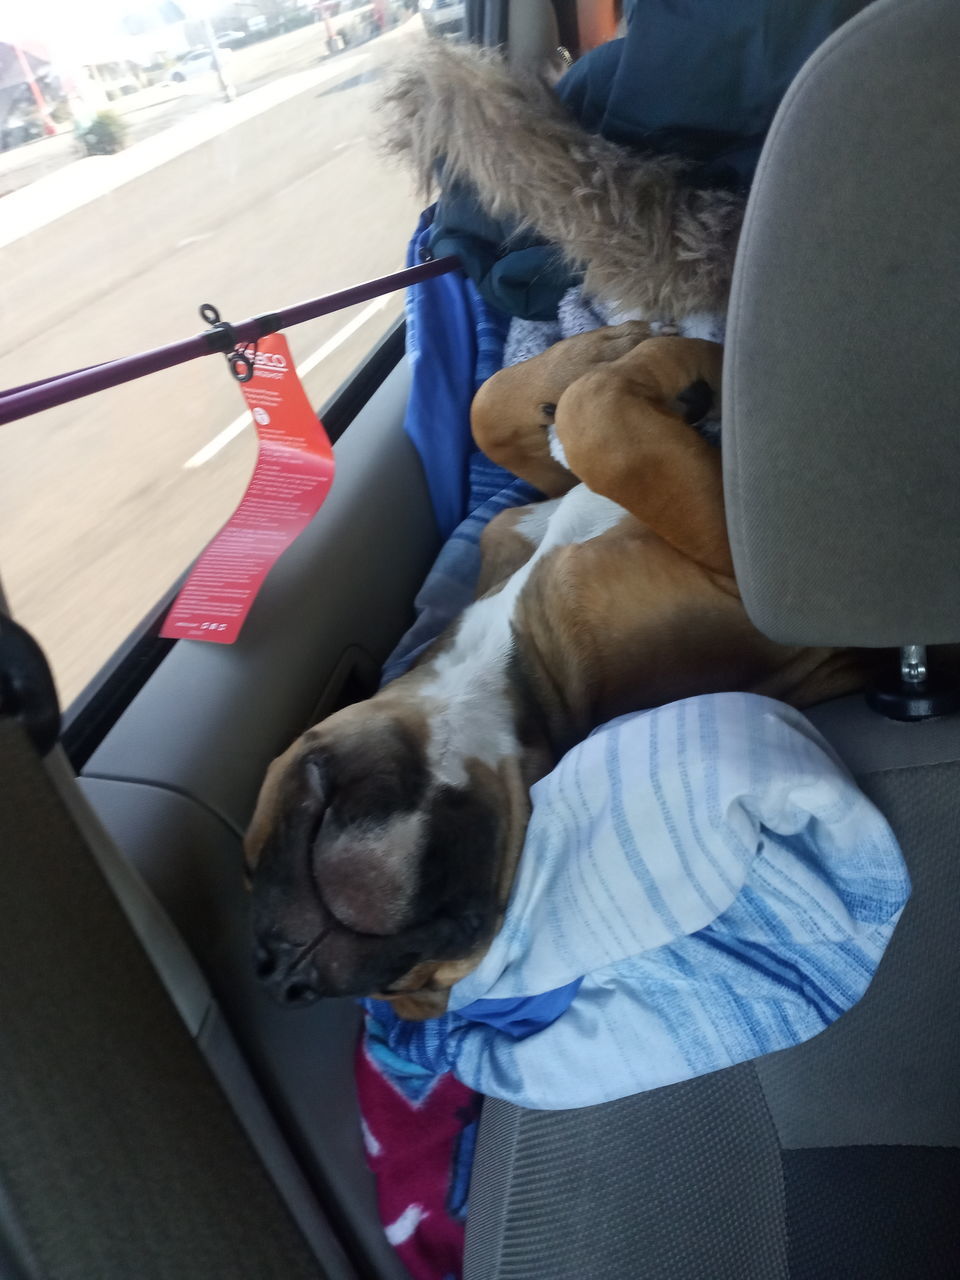 mammal, domestic animals, transportation, one animal, pet, mode of transportation, canine, dog, animal, animal themes, vehicle interior, travel, car seat, indoors, motor vehicle, adult, vehicle, one person, car, seat belt, relaxation, day, high angle view, sitting, seat, men, car interior, sleeping, vehicle seat, land vehicle, lifestyles